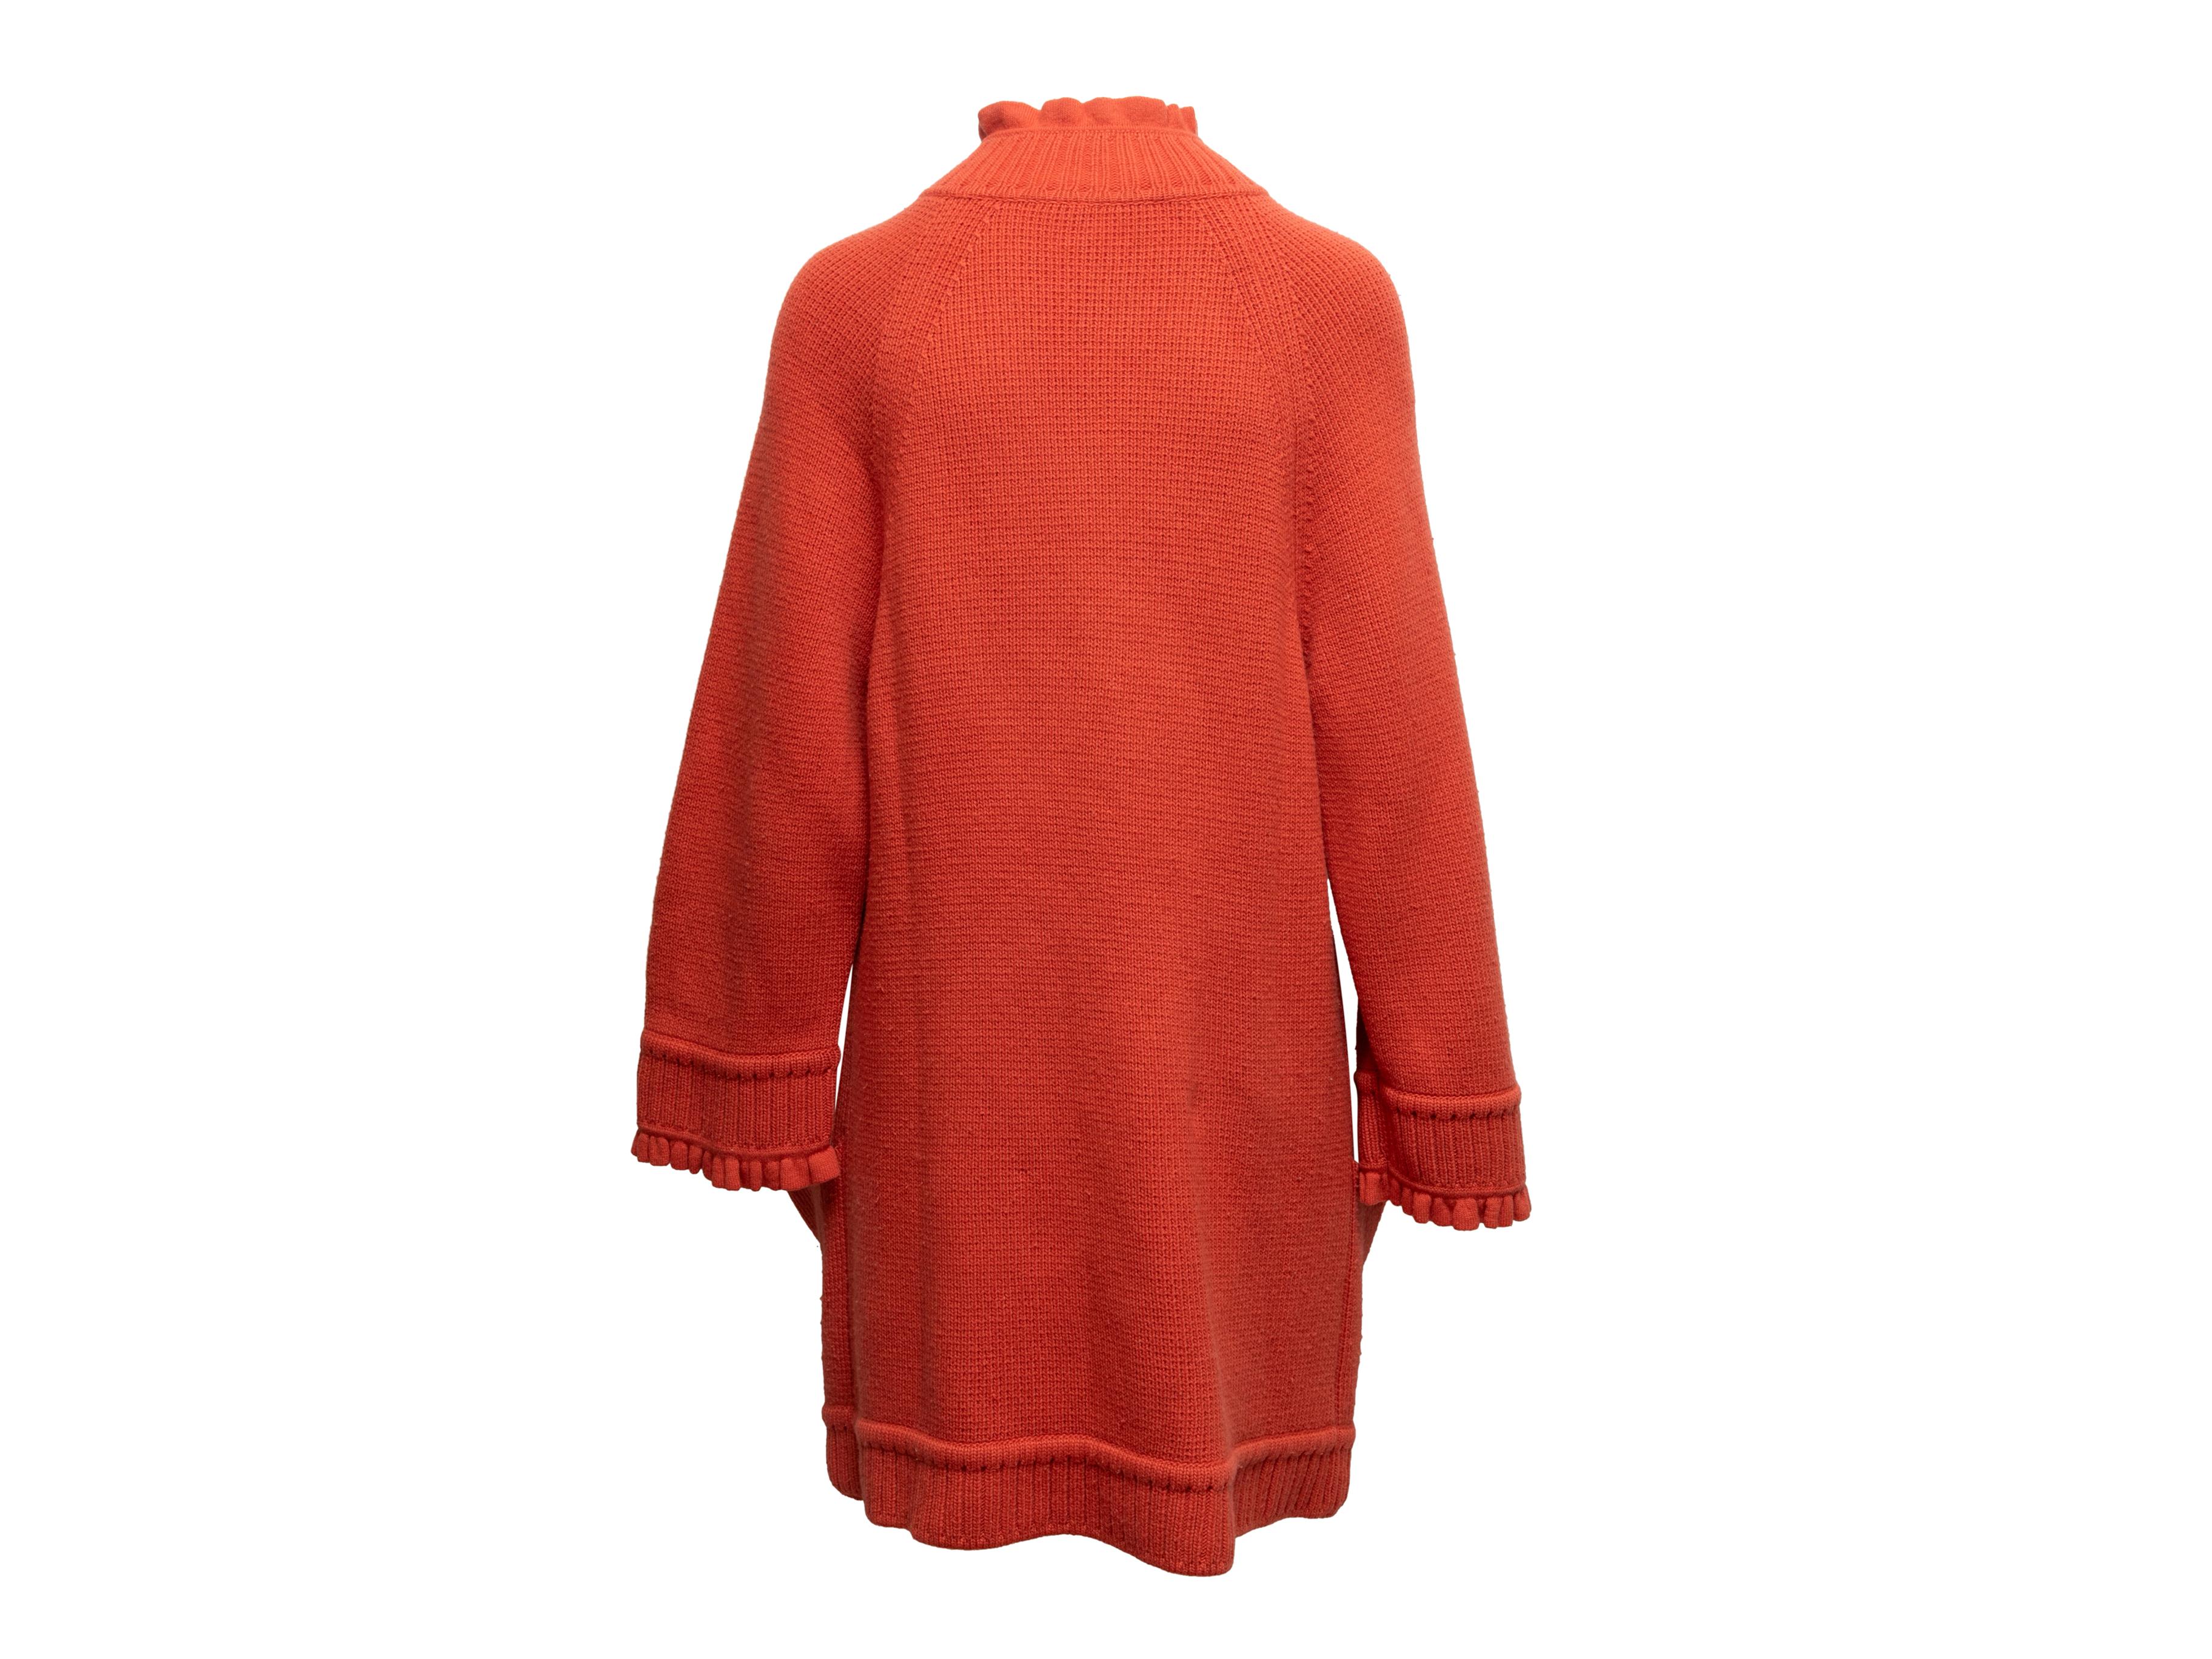 Vintage orange virgin wool and cashmere-blend longline cardigan by Valentino. Crew neck. Dual hip pockets. Button closures at center front. 32